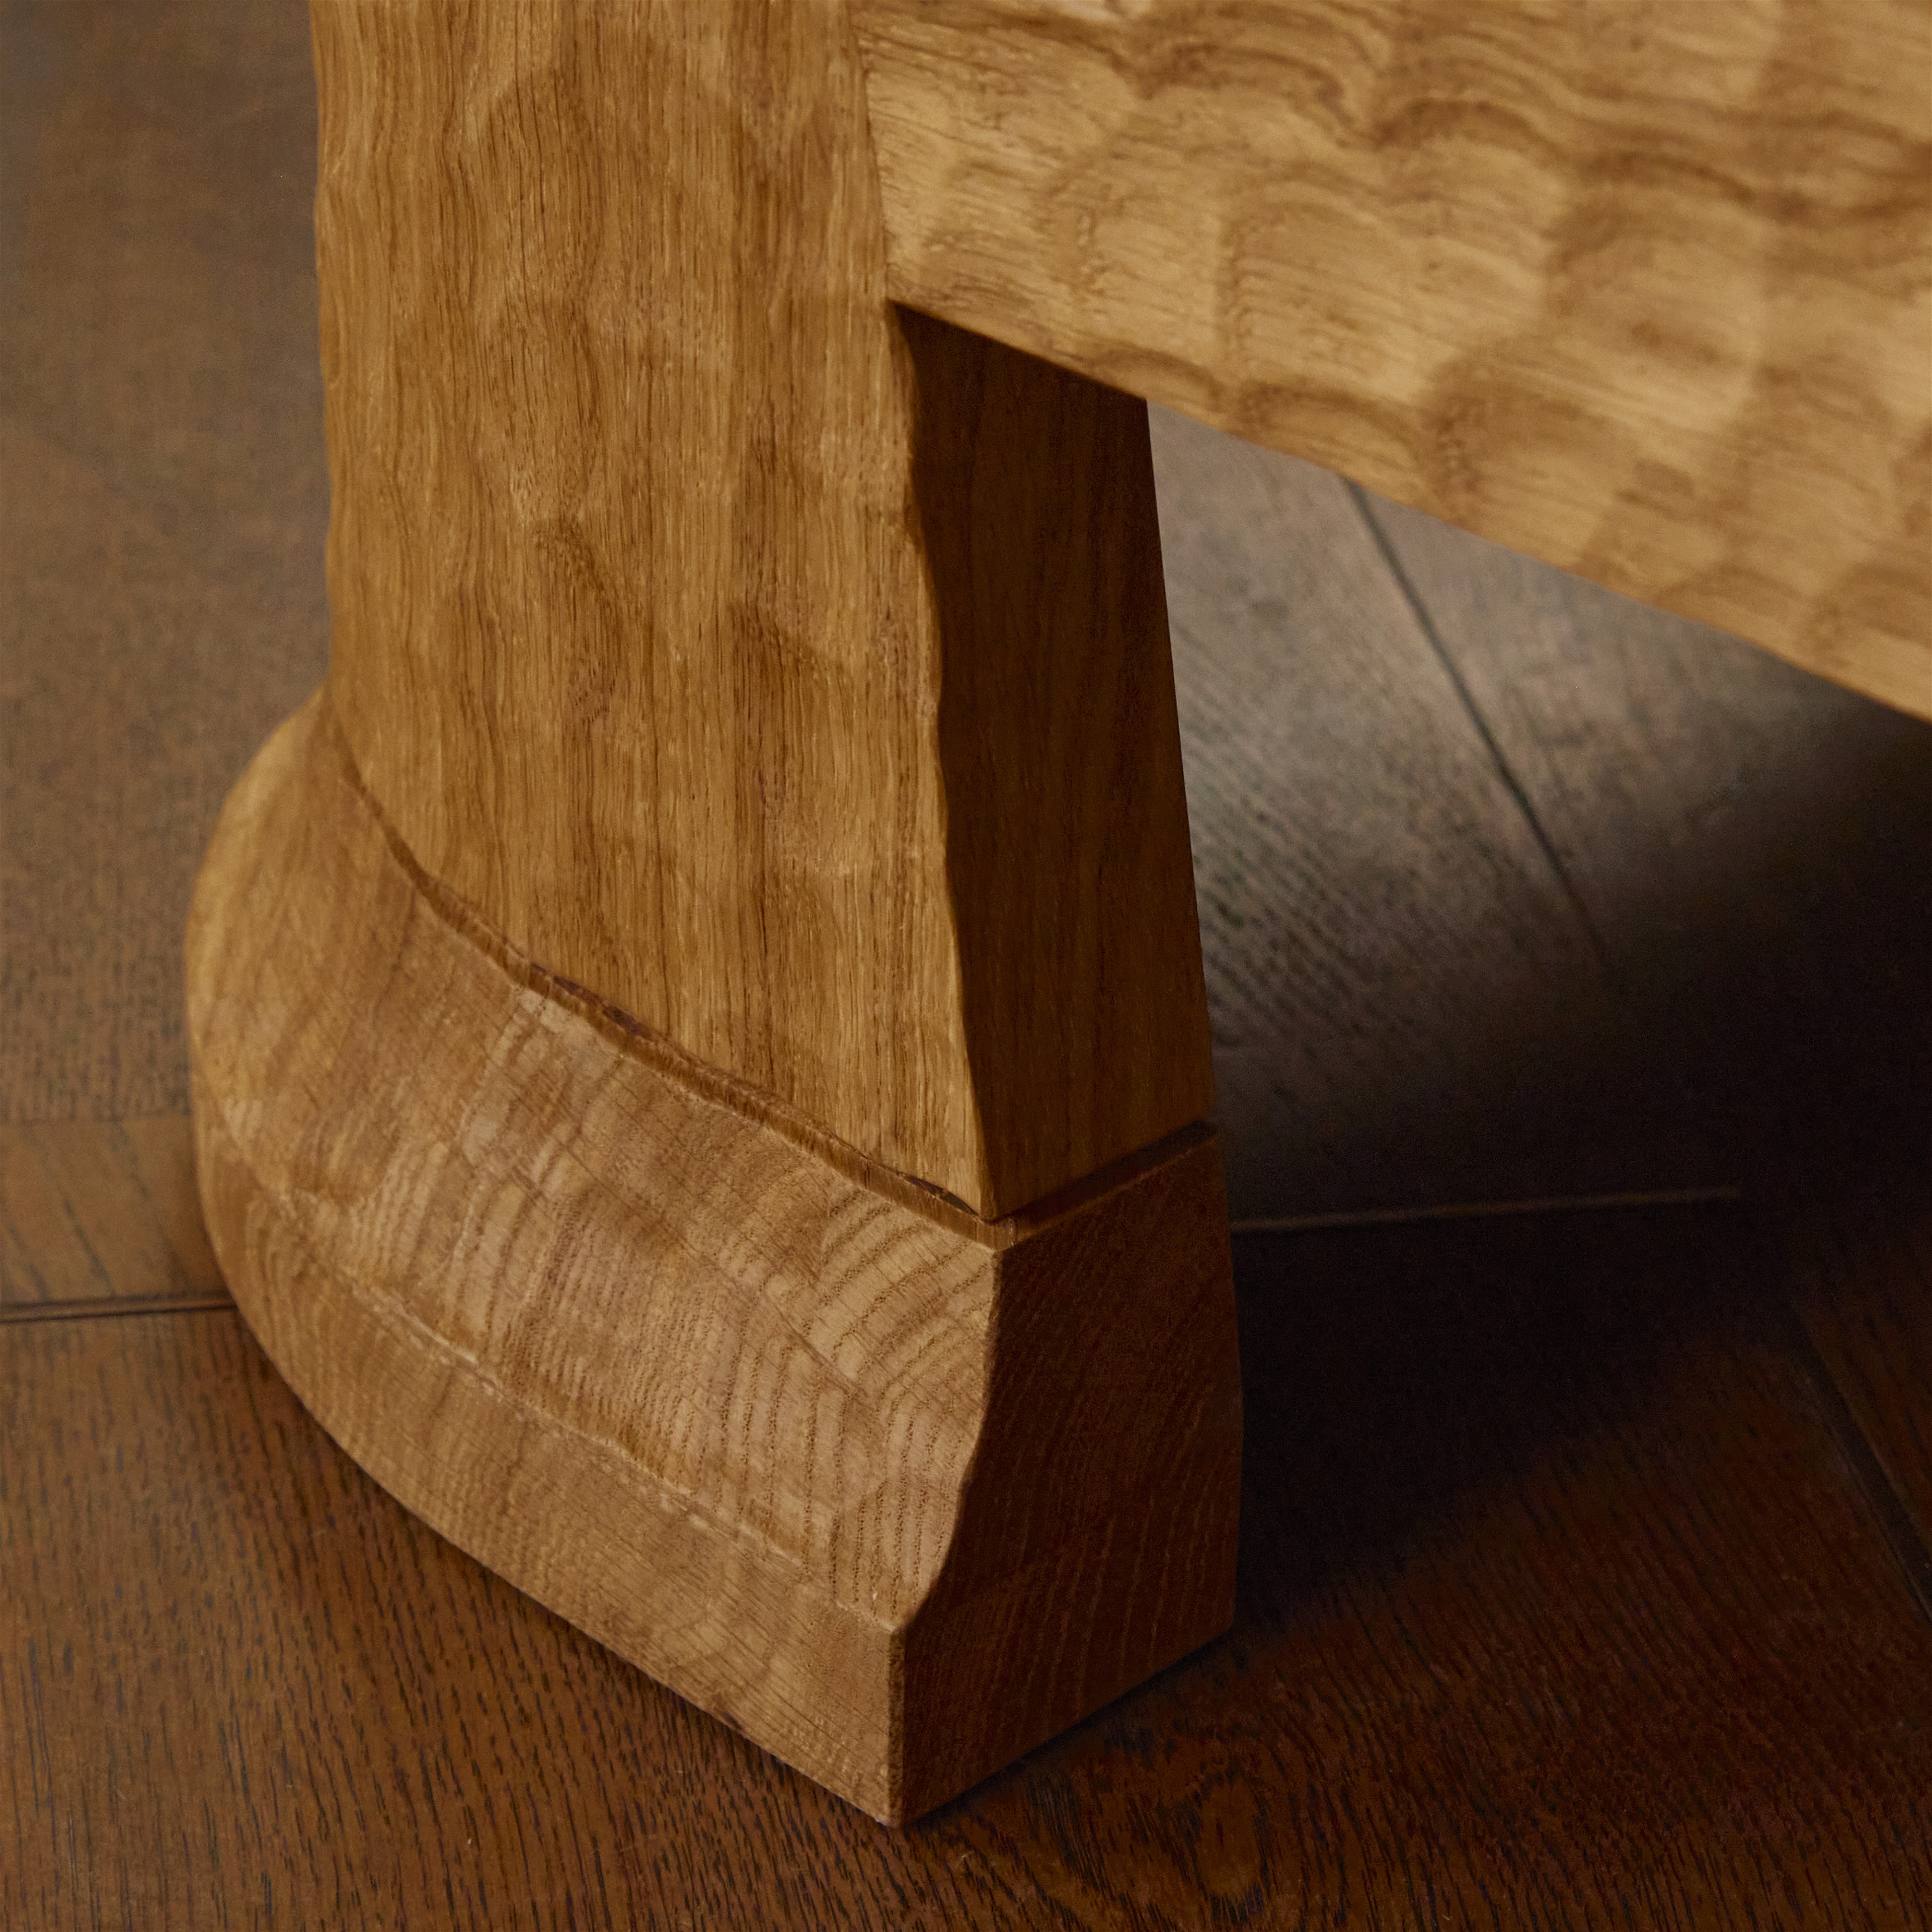 a close up of a wooden bench on a wooden floor